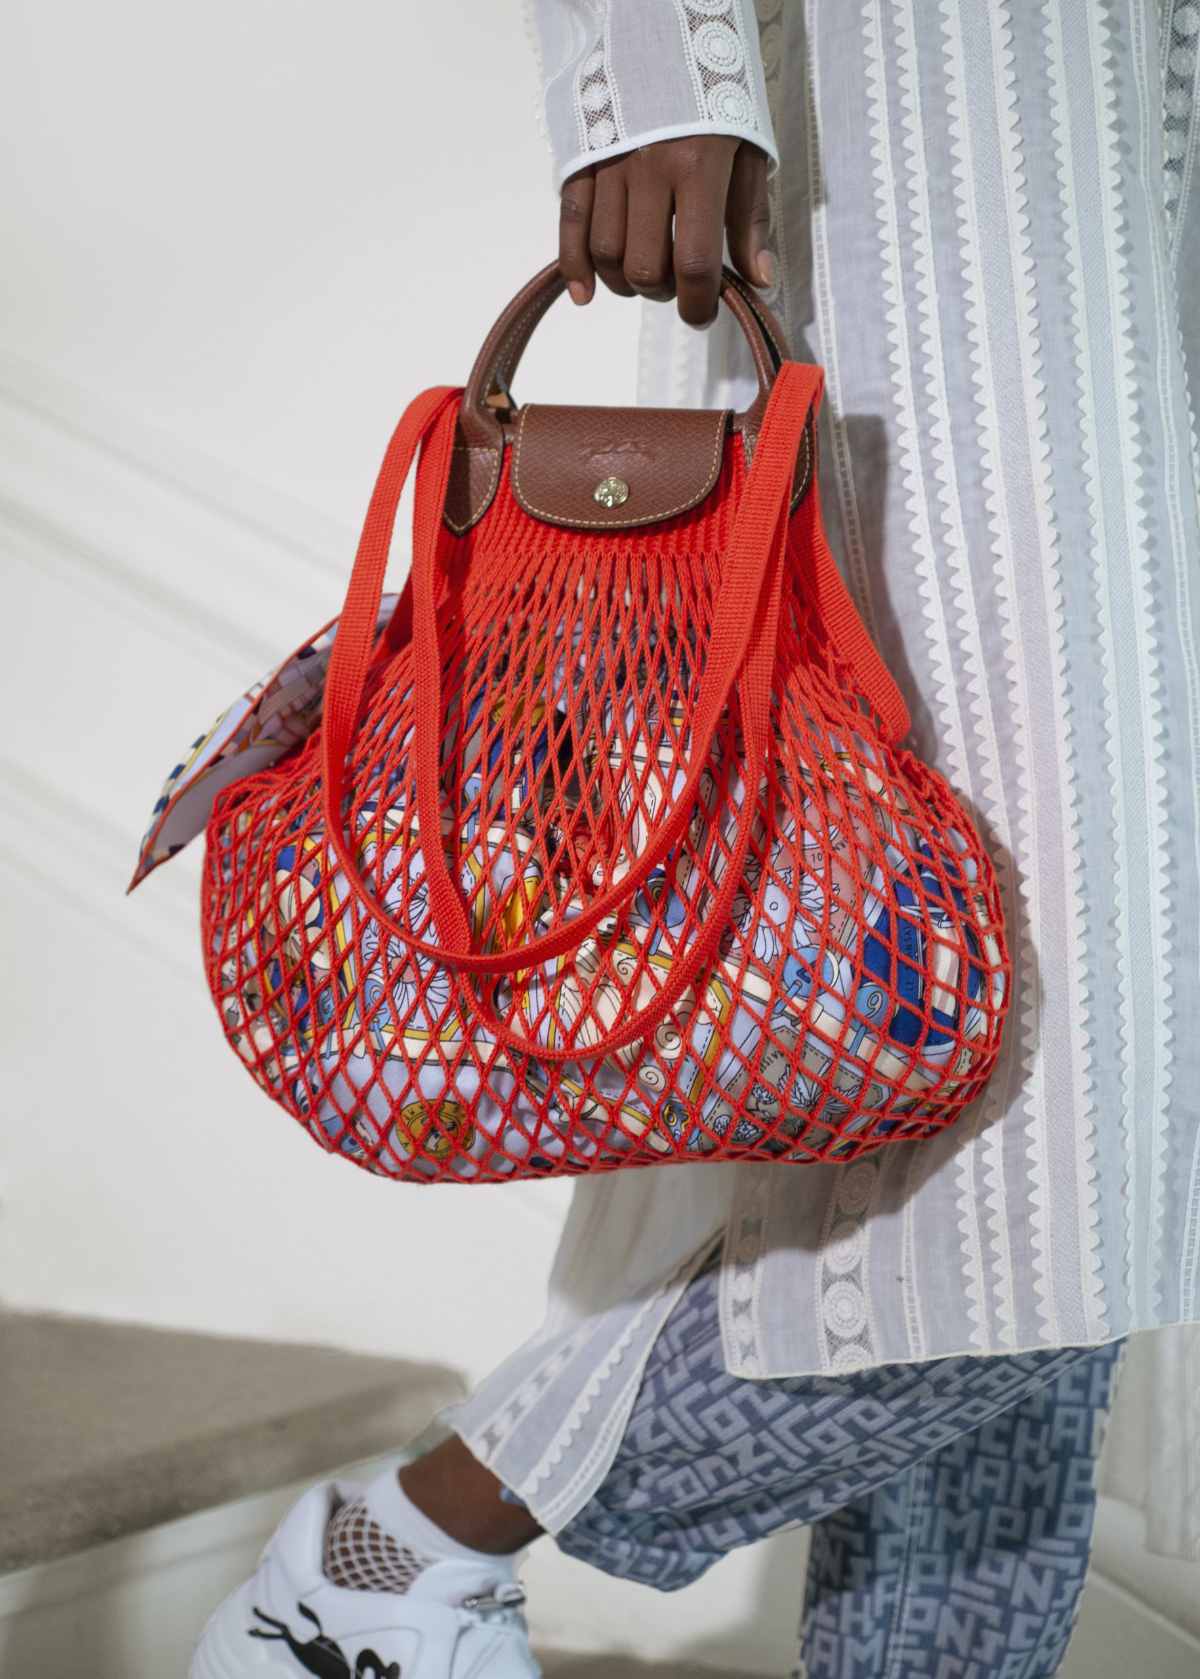 Longchamp and Filt Collaborate to Launch New Twist on Iconic Bags